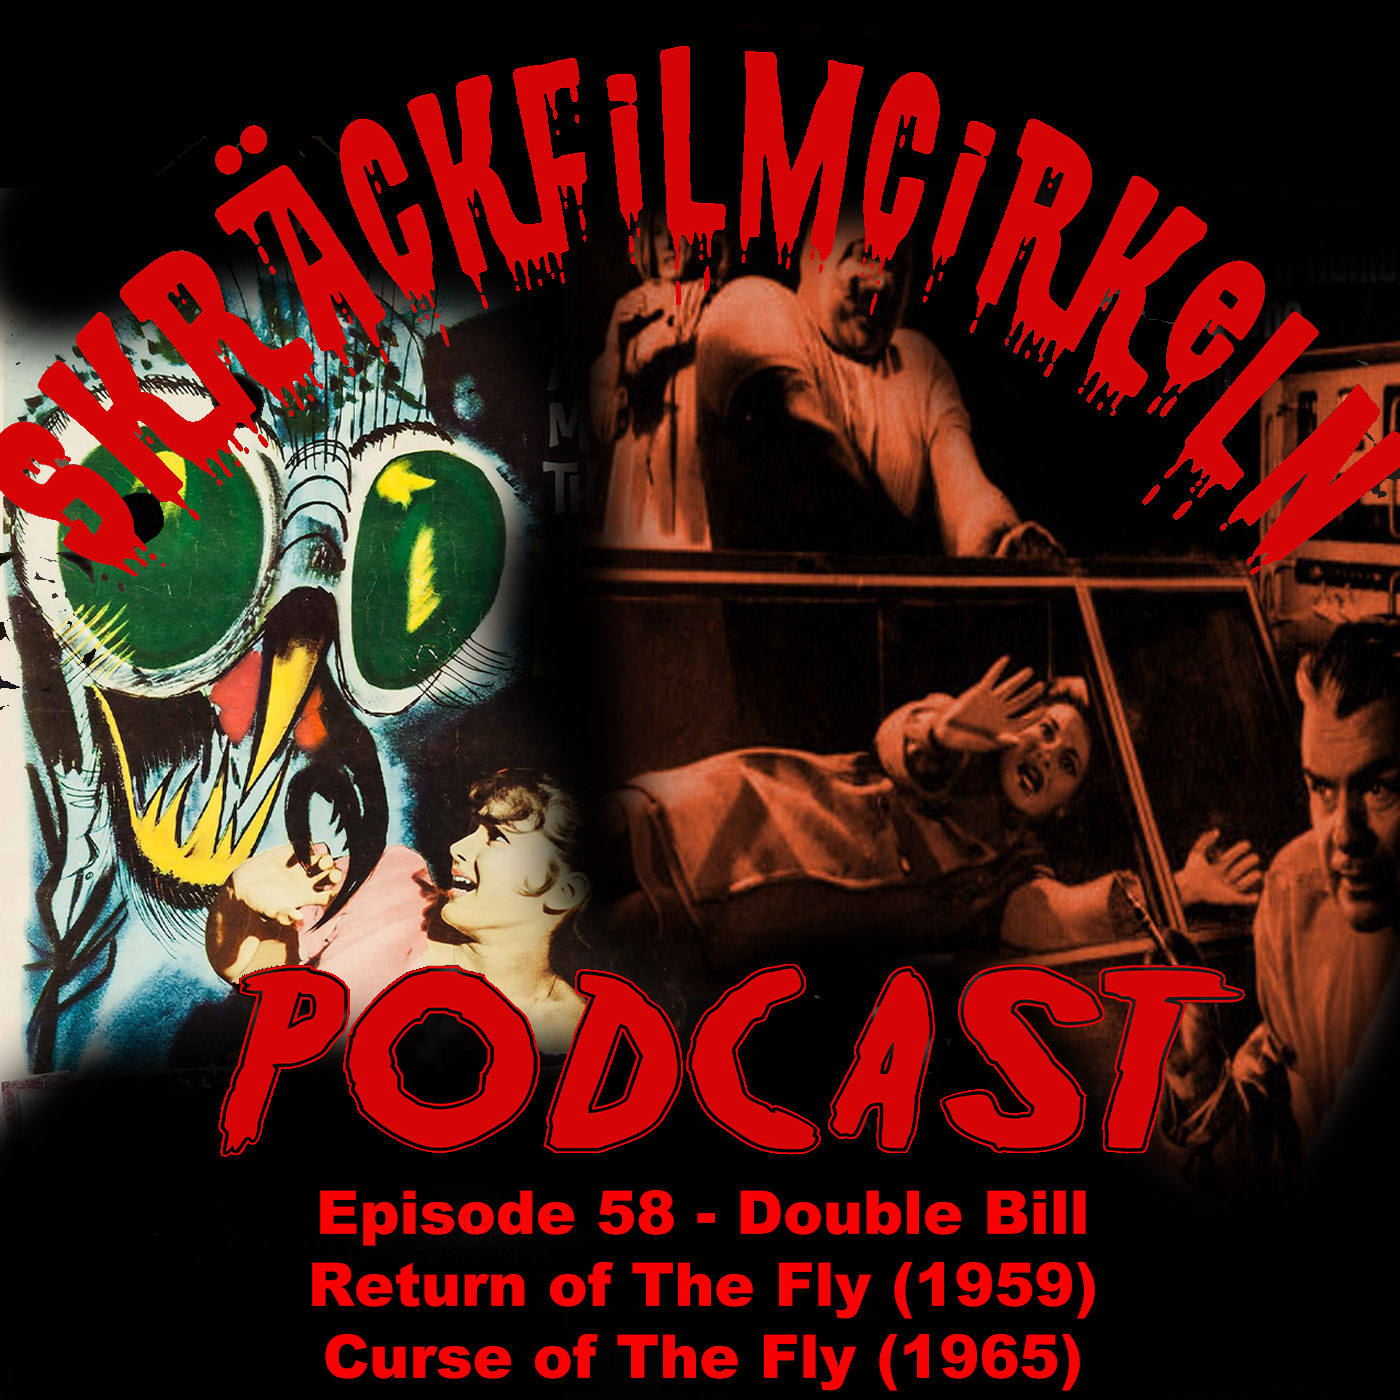 Episode 58 – The Return of The Fly/The Curse of The Fly